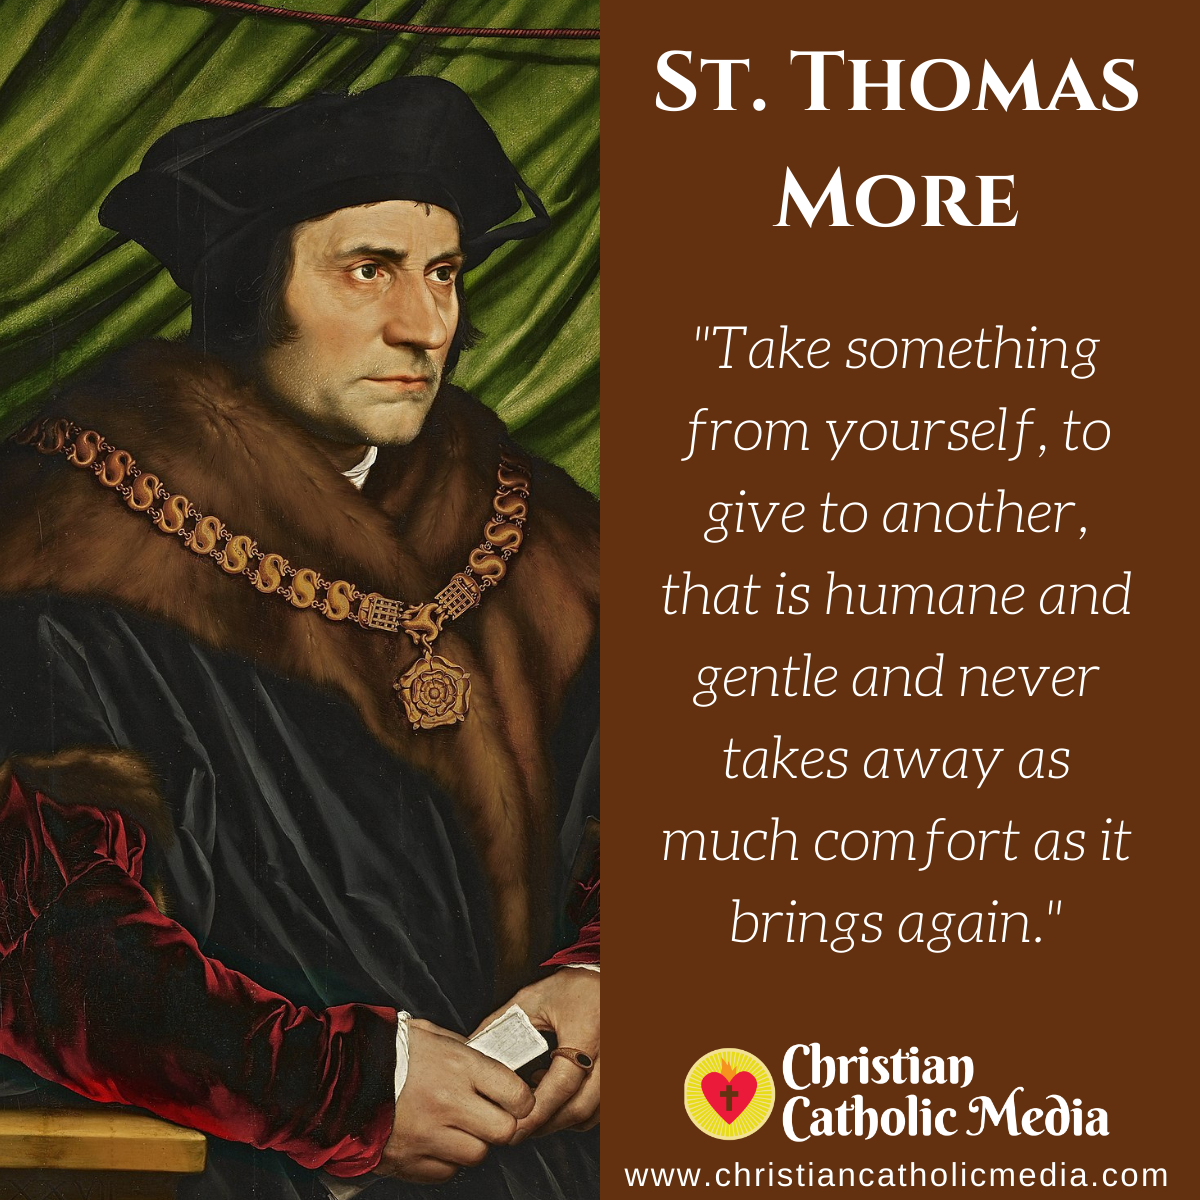 St. Thomas More - Tuesday June 22, 2021